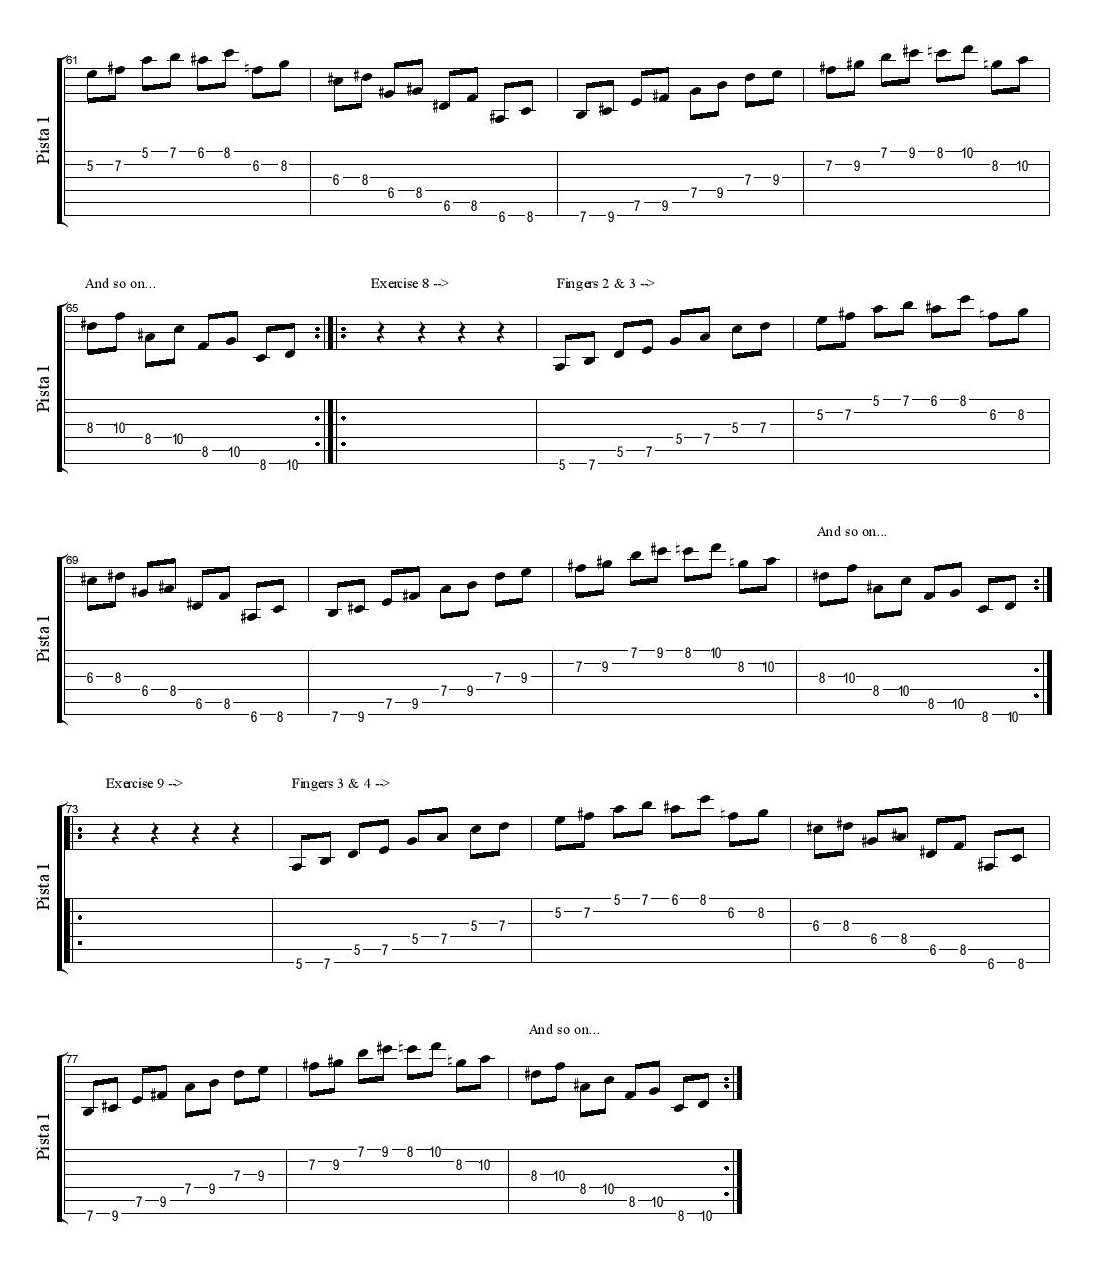 Guitar Pro   Warm Up Exercises   Warm Up Exercises By Bright_Eyes v1 page 004 apprendre la guitare